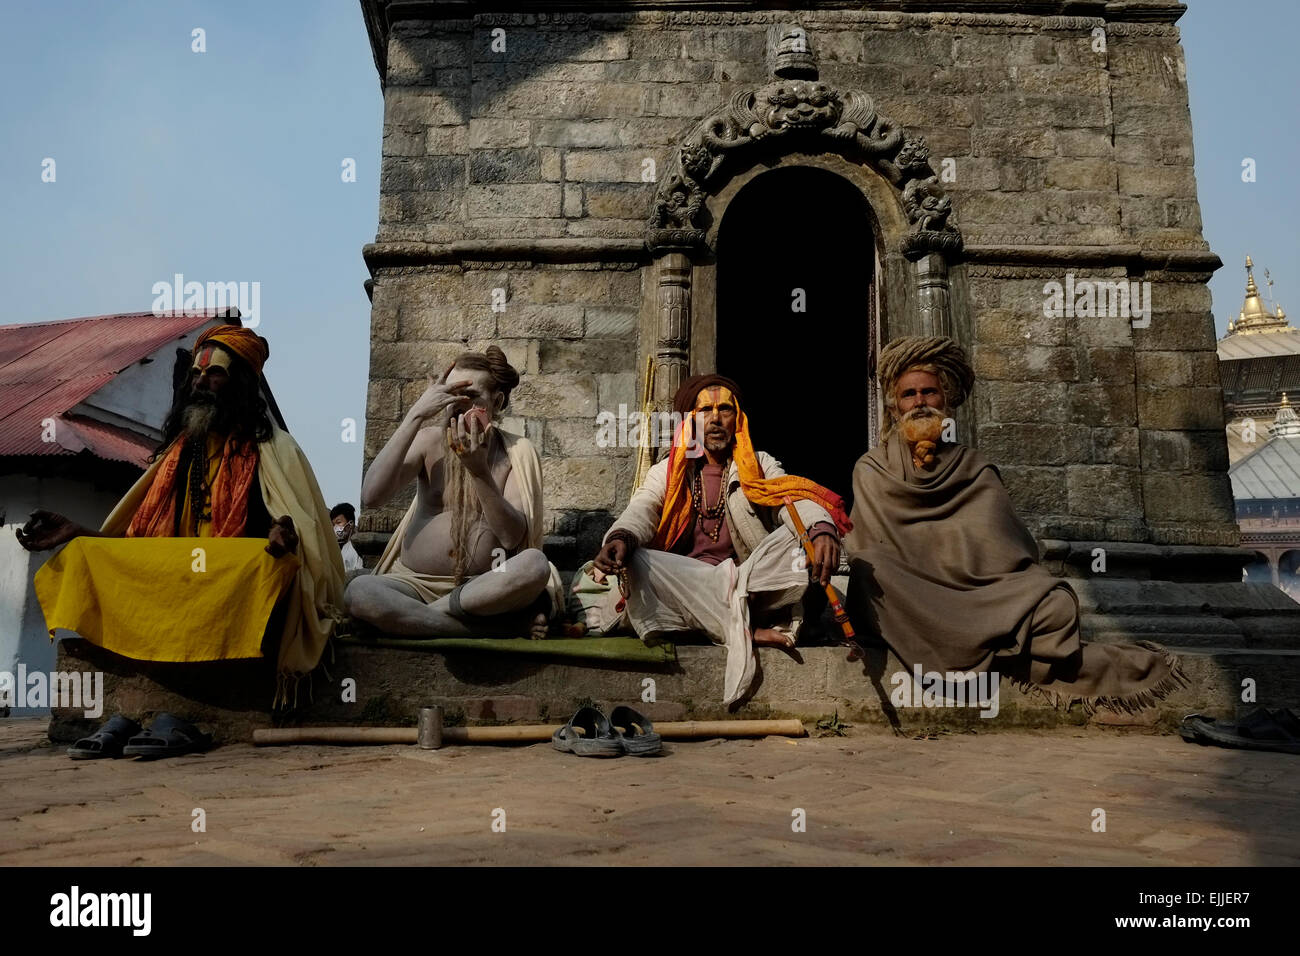 Aghori ascetic Shaiva sadhus with faces covered in ash and paint at Pashupatinath Temple which is on UNESCO World Heritage Sites list in Kathmandu Nepal Stock Photo